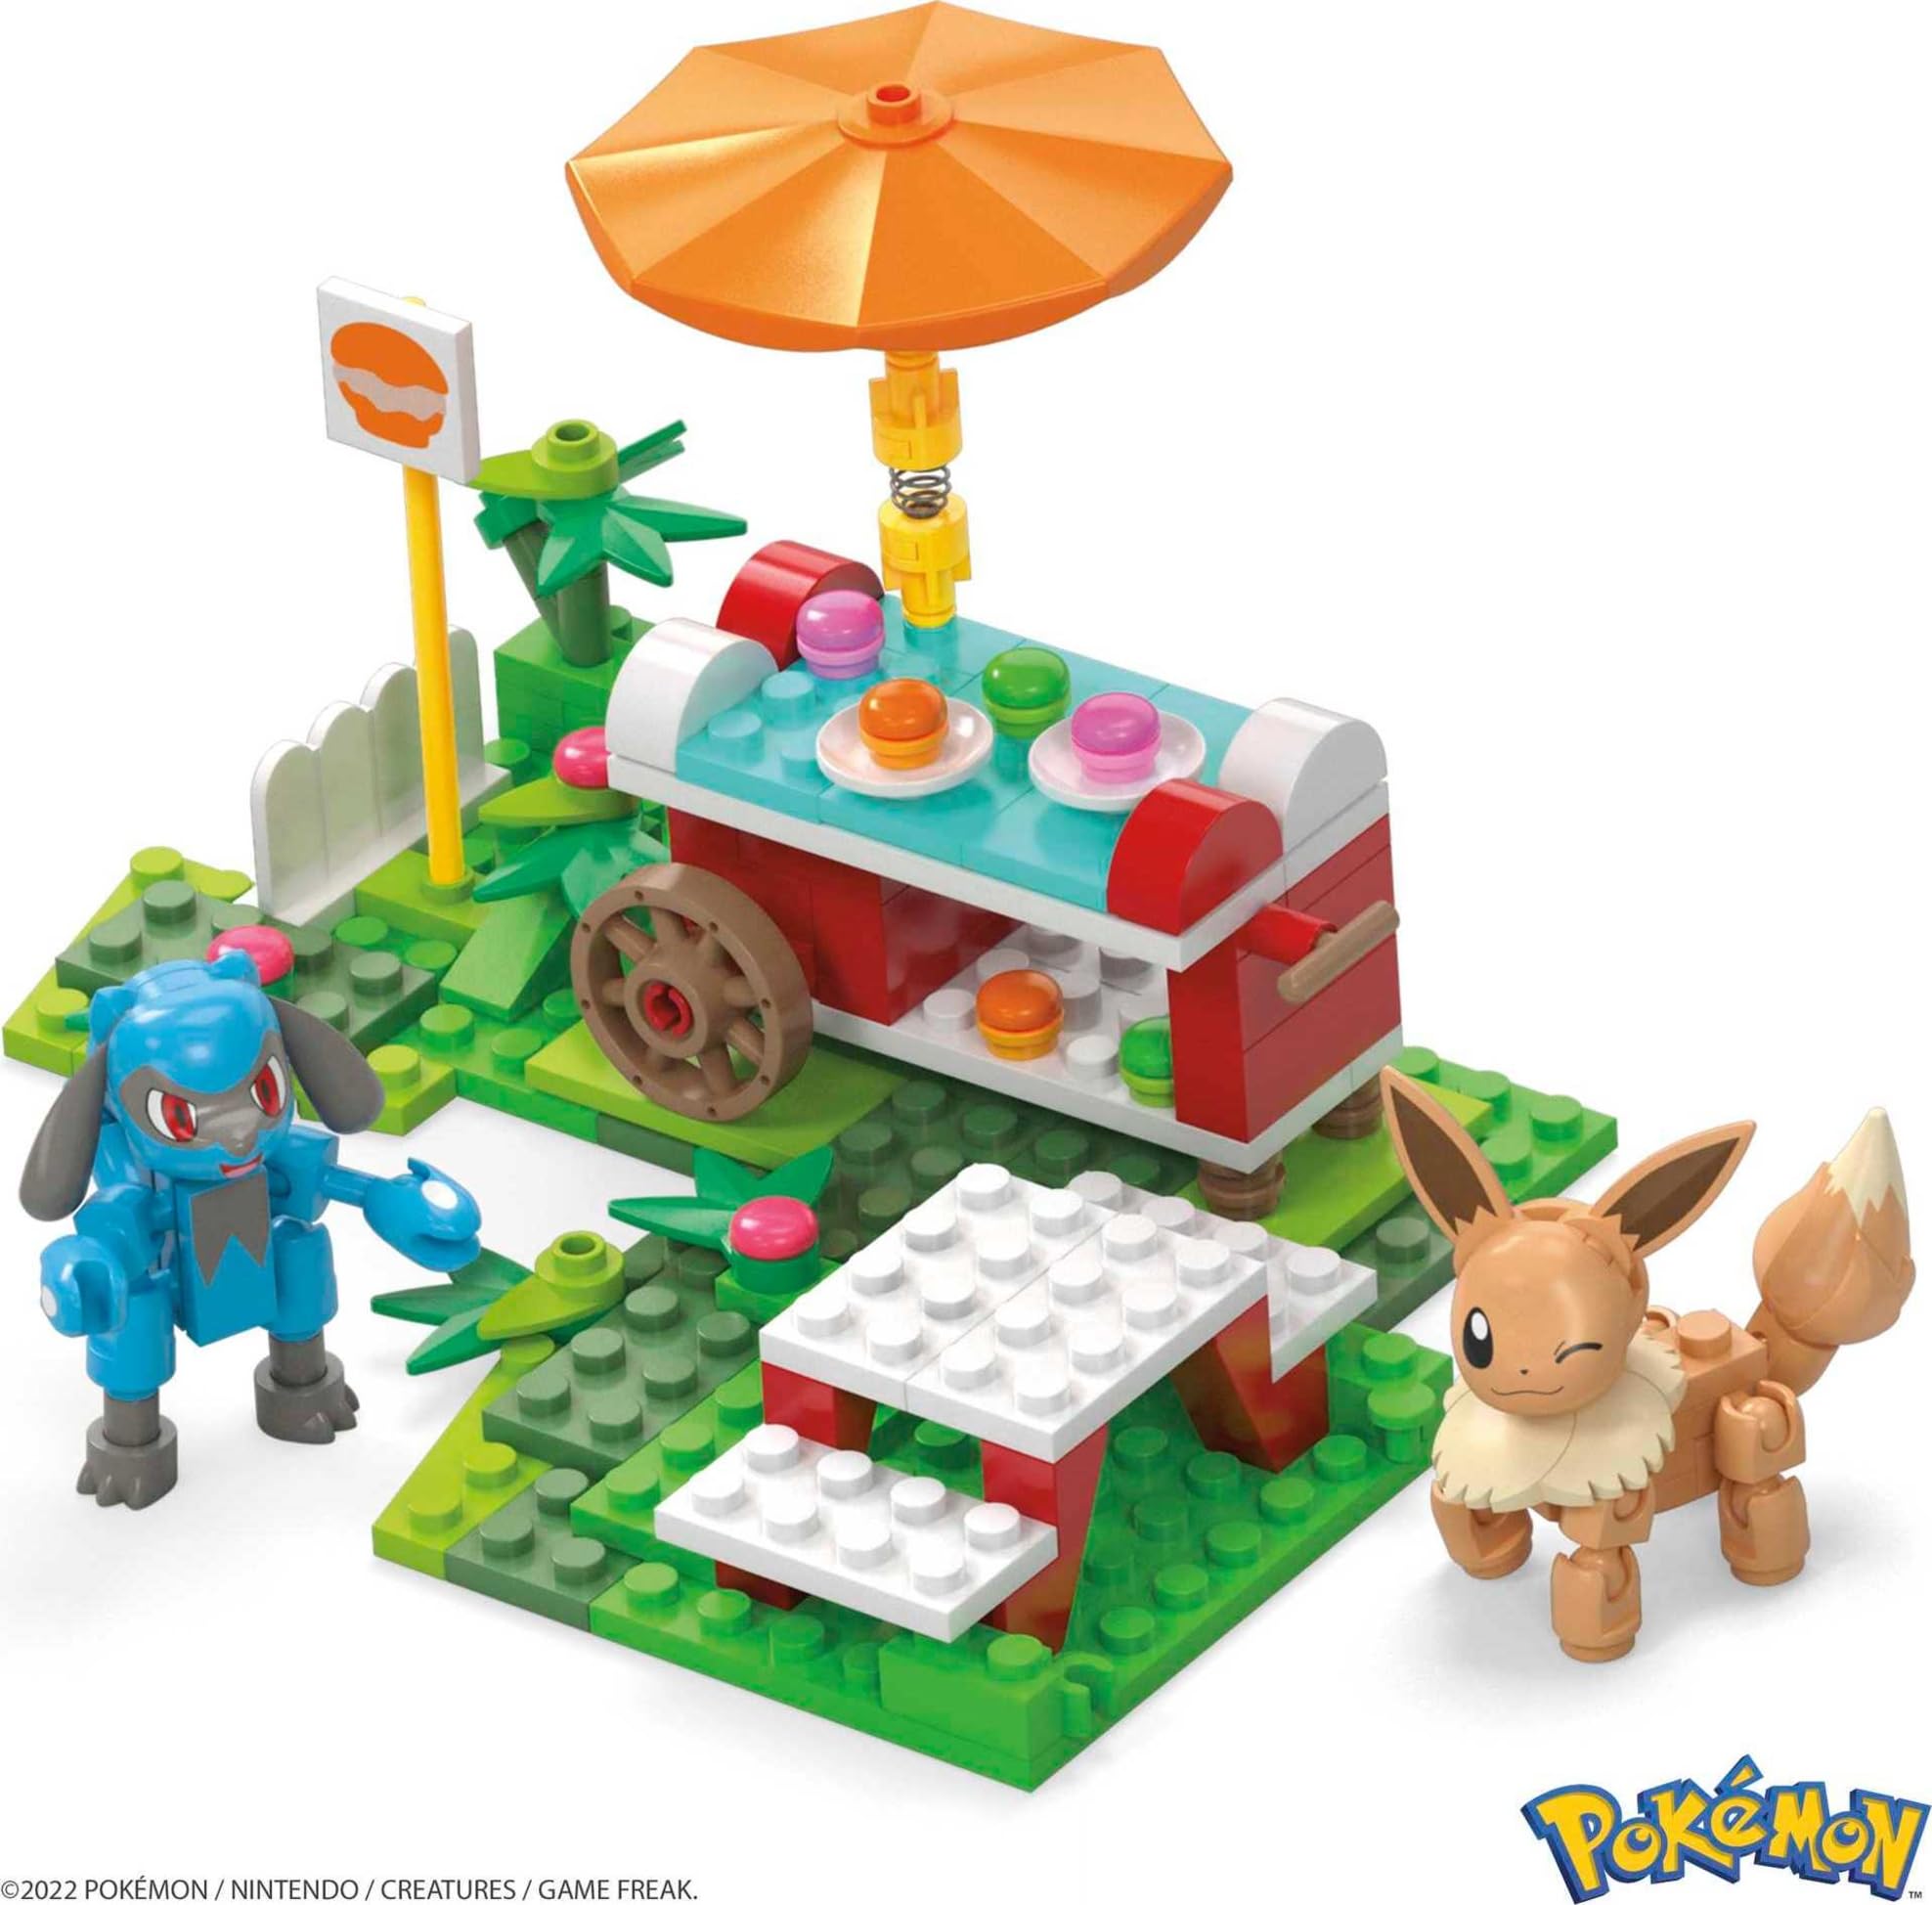 MEGA Pokémon Action Figure Building Toys Set, Pokémon Picnic With 193 Pieces, 2 Poseable Characters, Eevee and Riolu, Gift Idea For Kids